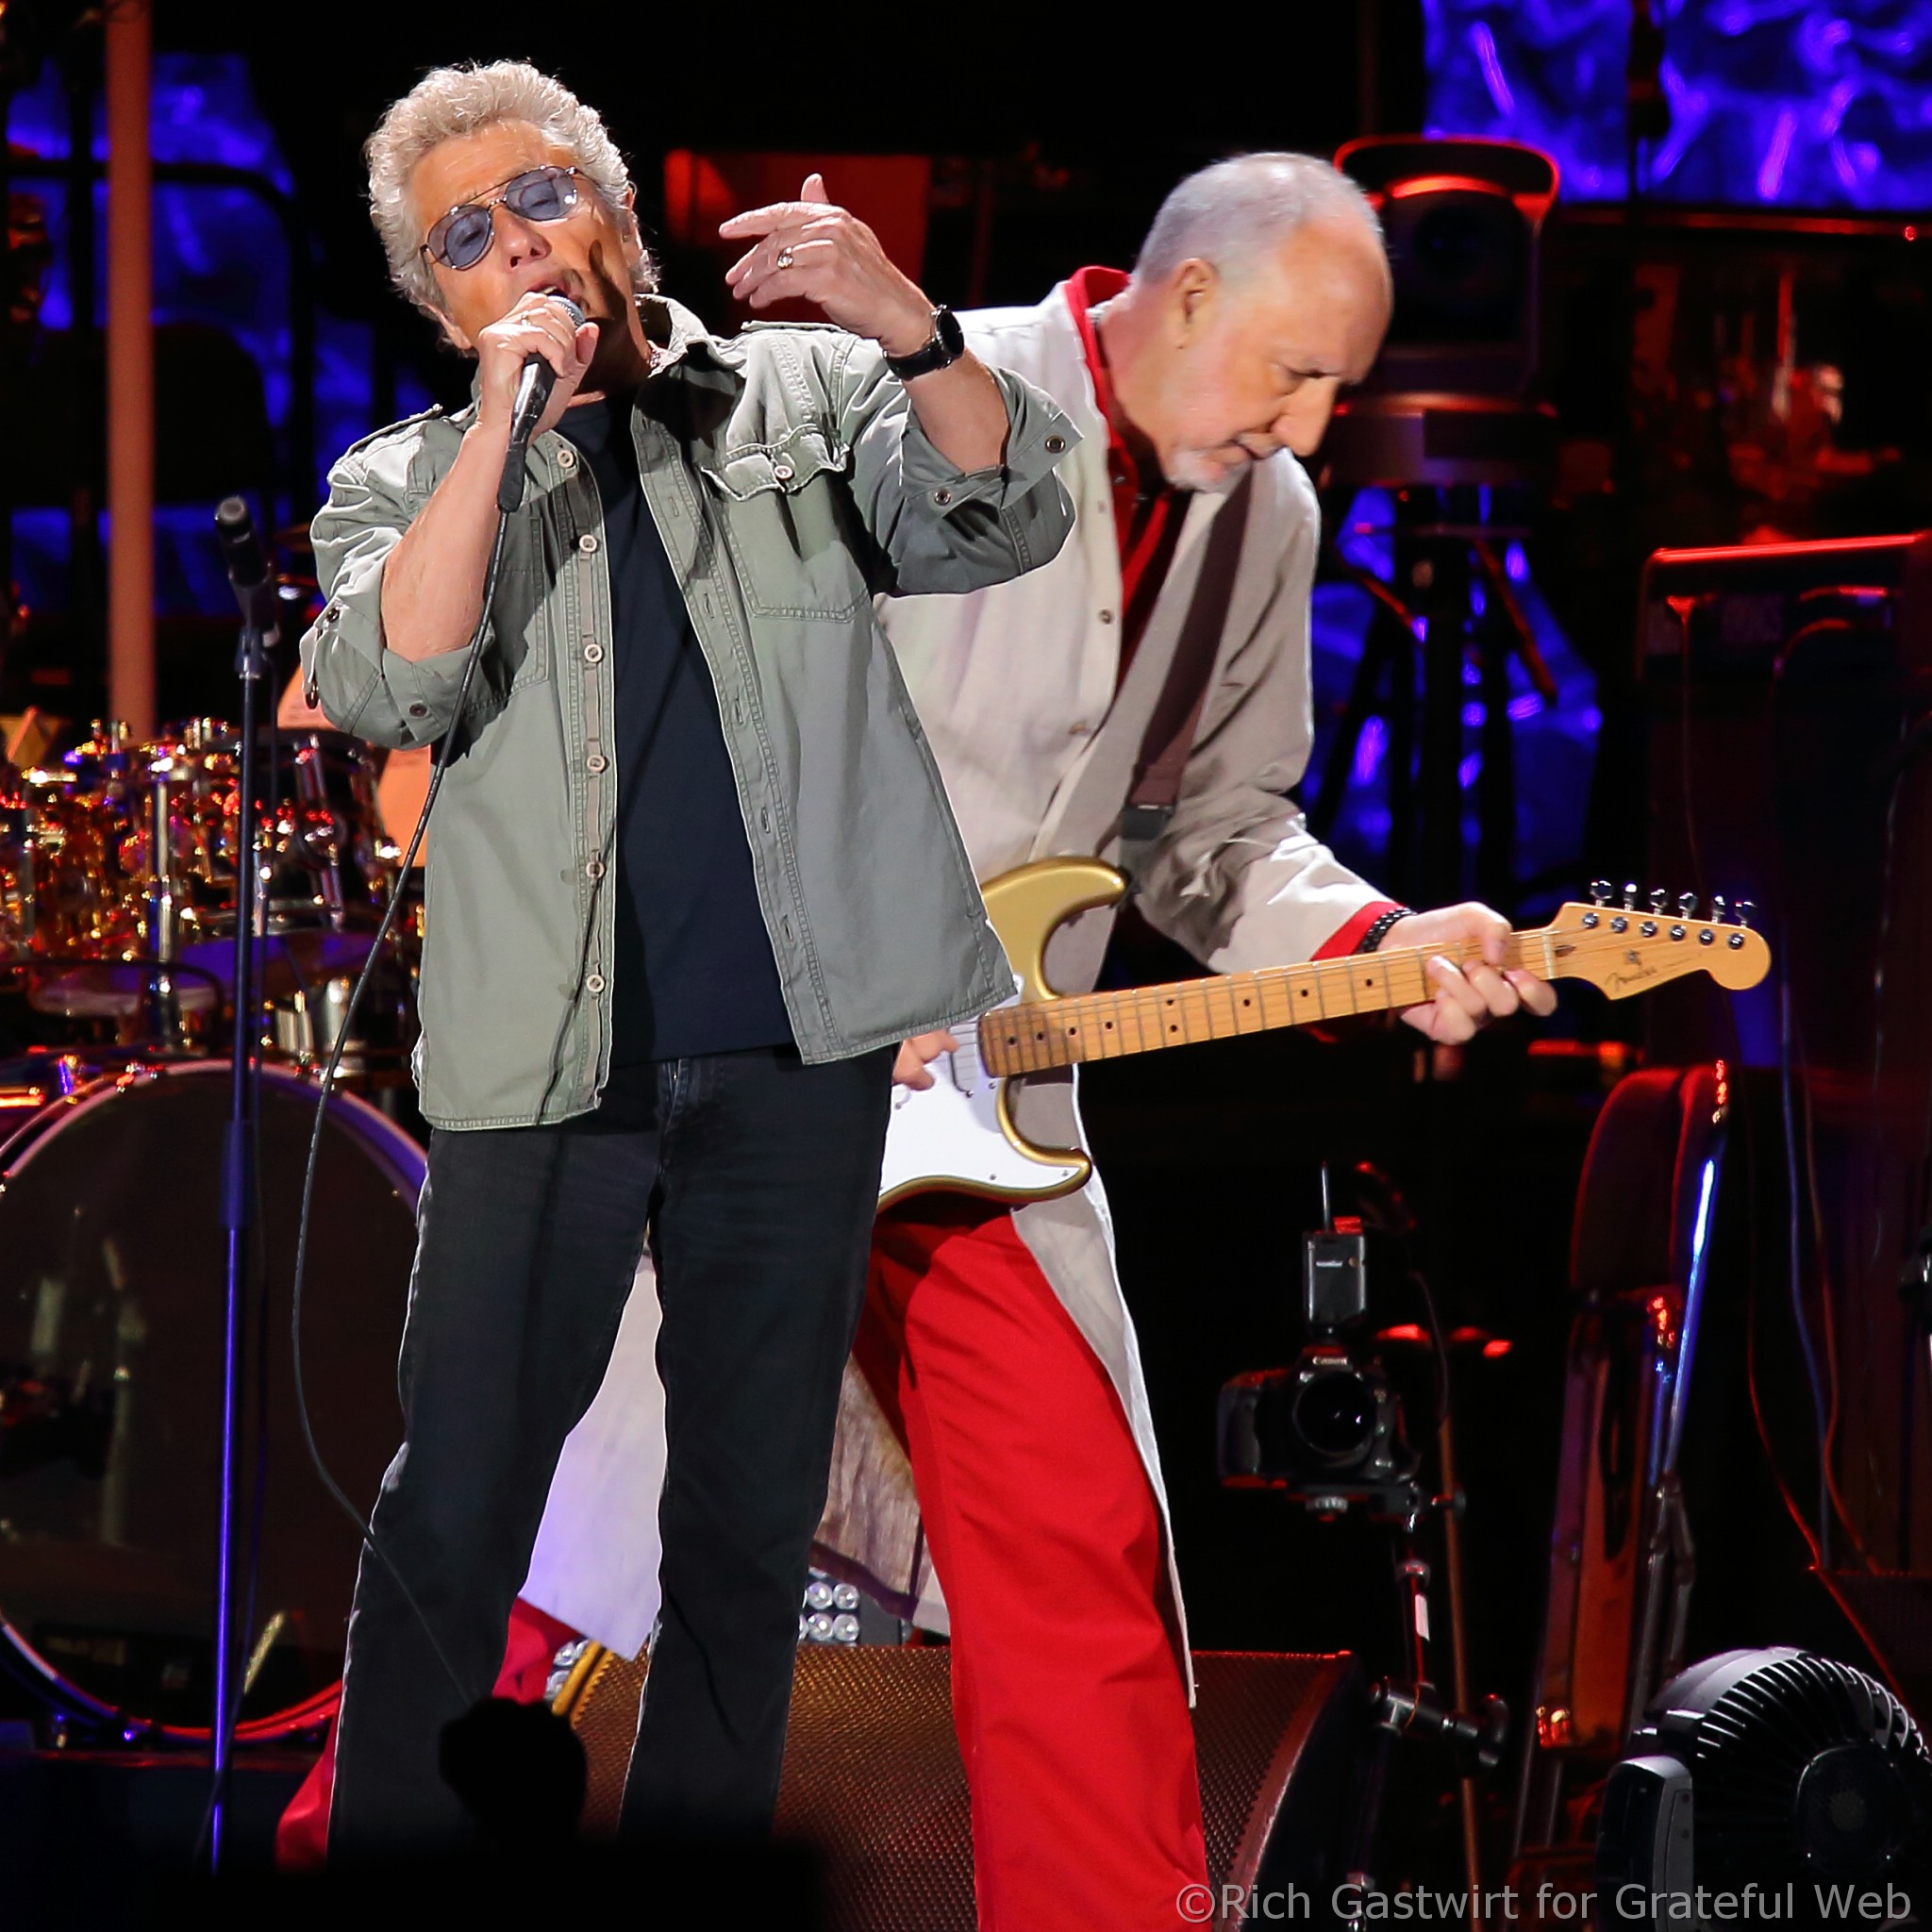 THE WHO ANNOUNCE RESCHEDULED ‘MOVING ON!’ TOUR DATES FOR DALLAS, HOUSTON AND DENVER 